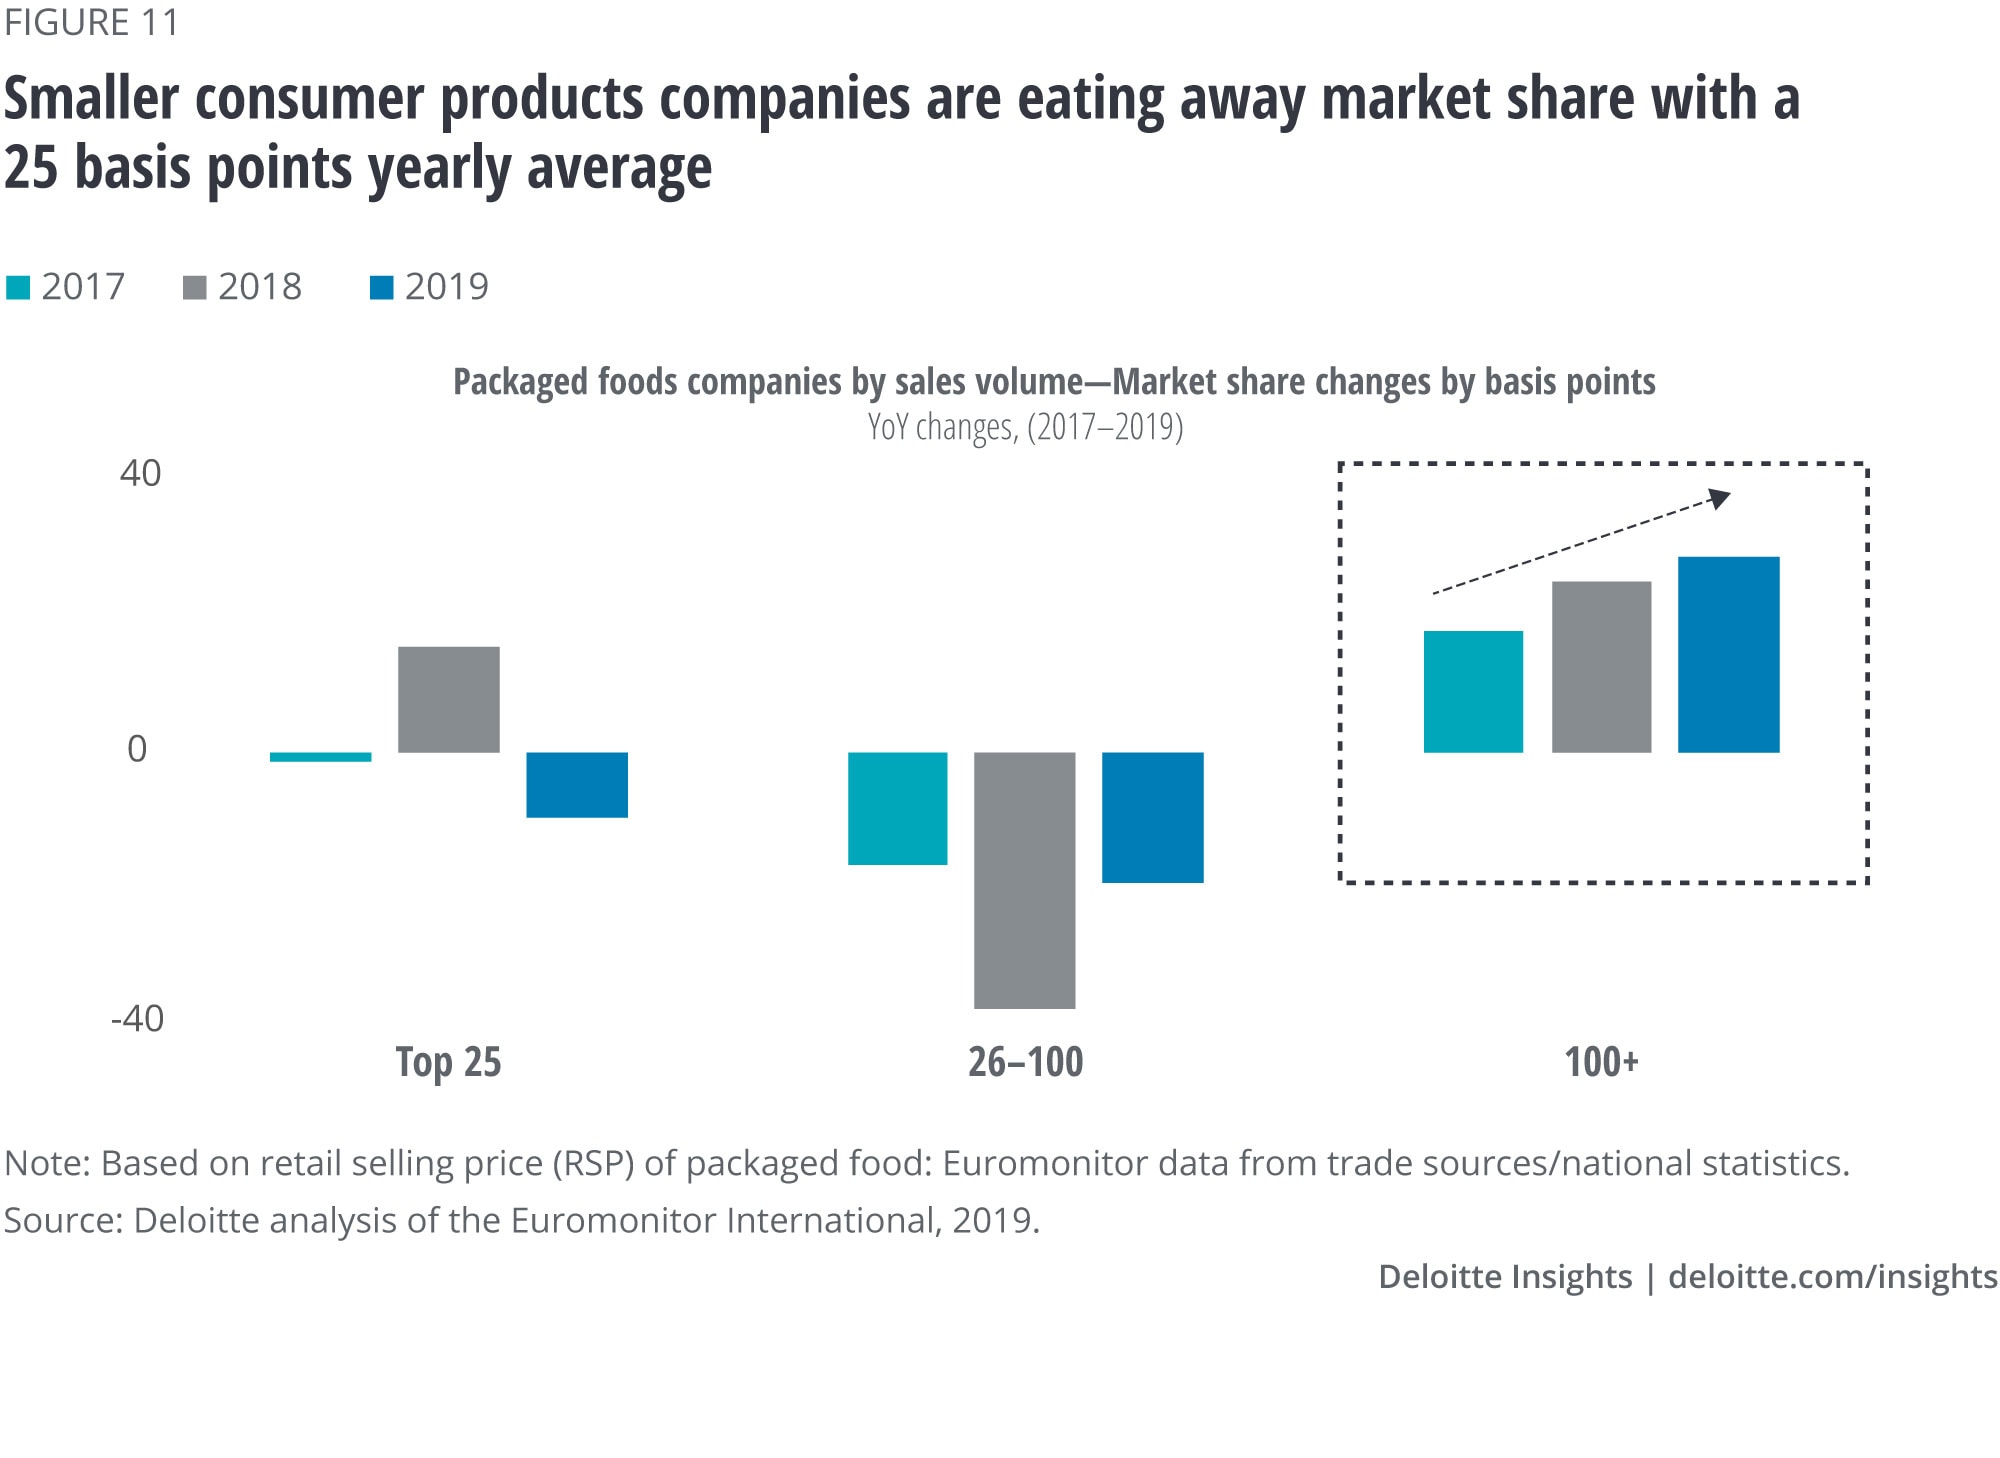 Smaller packaged food companies are eating away market share with a 25-basis-point yearly average